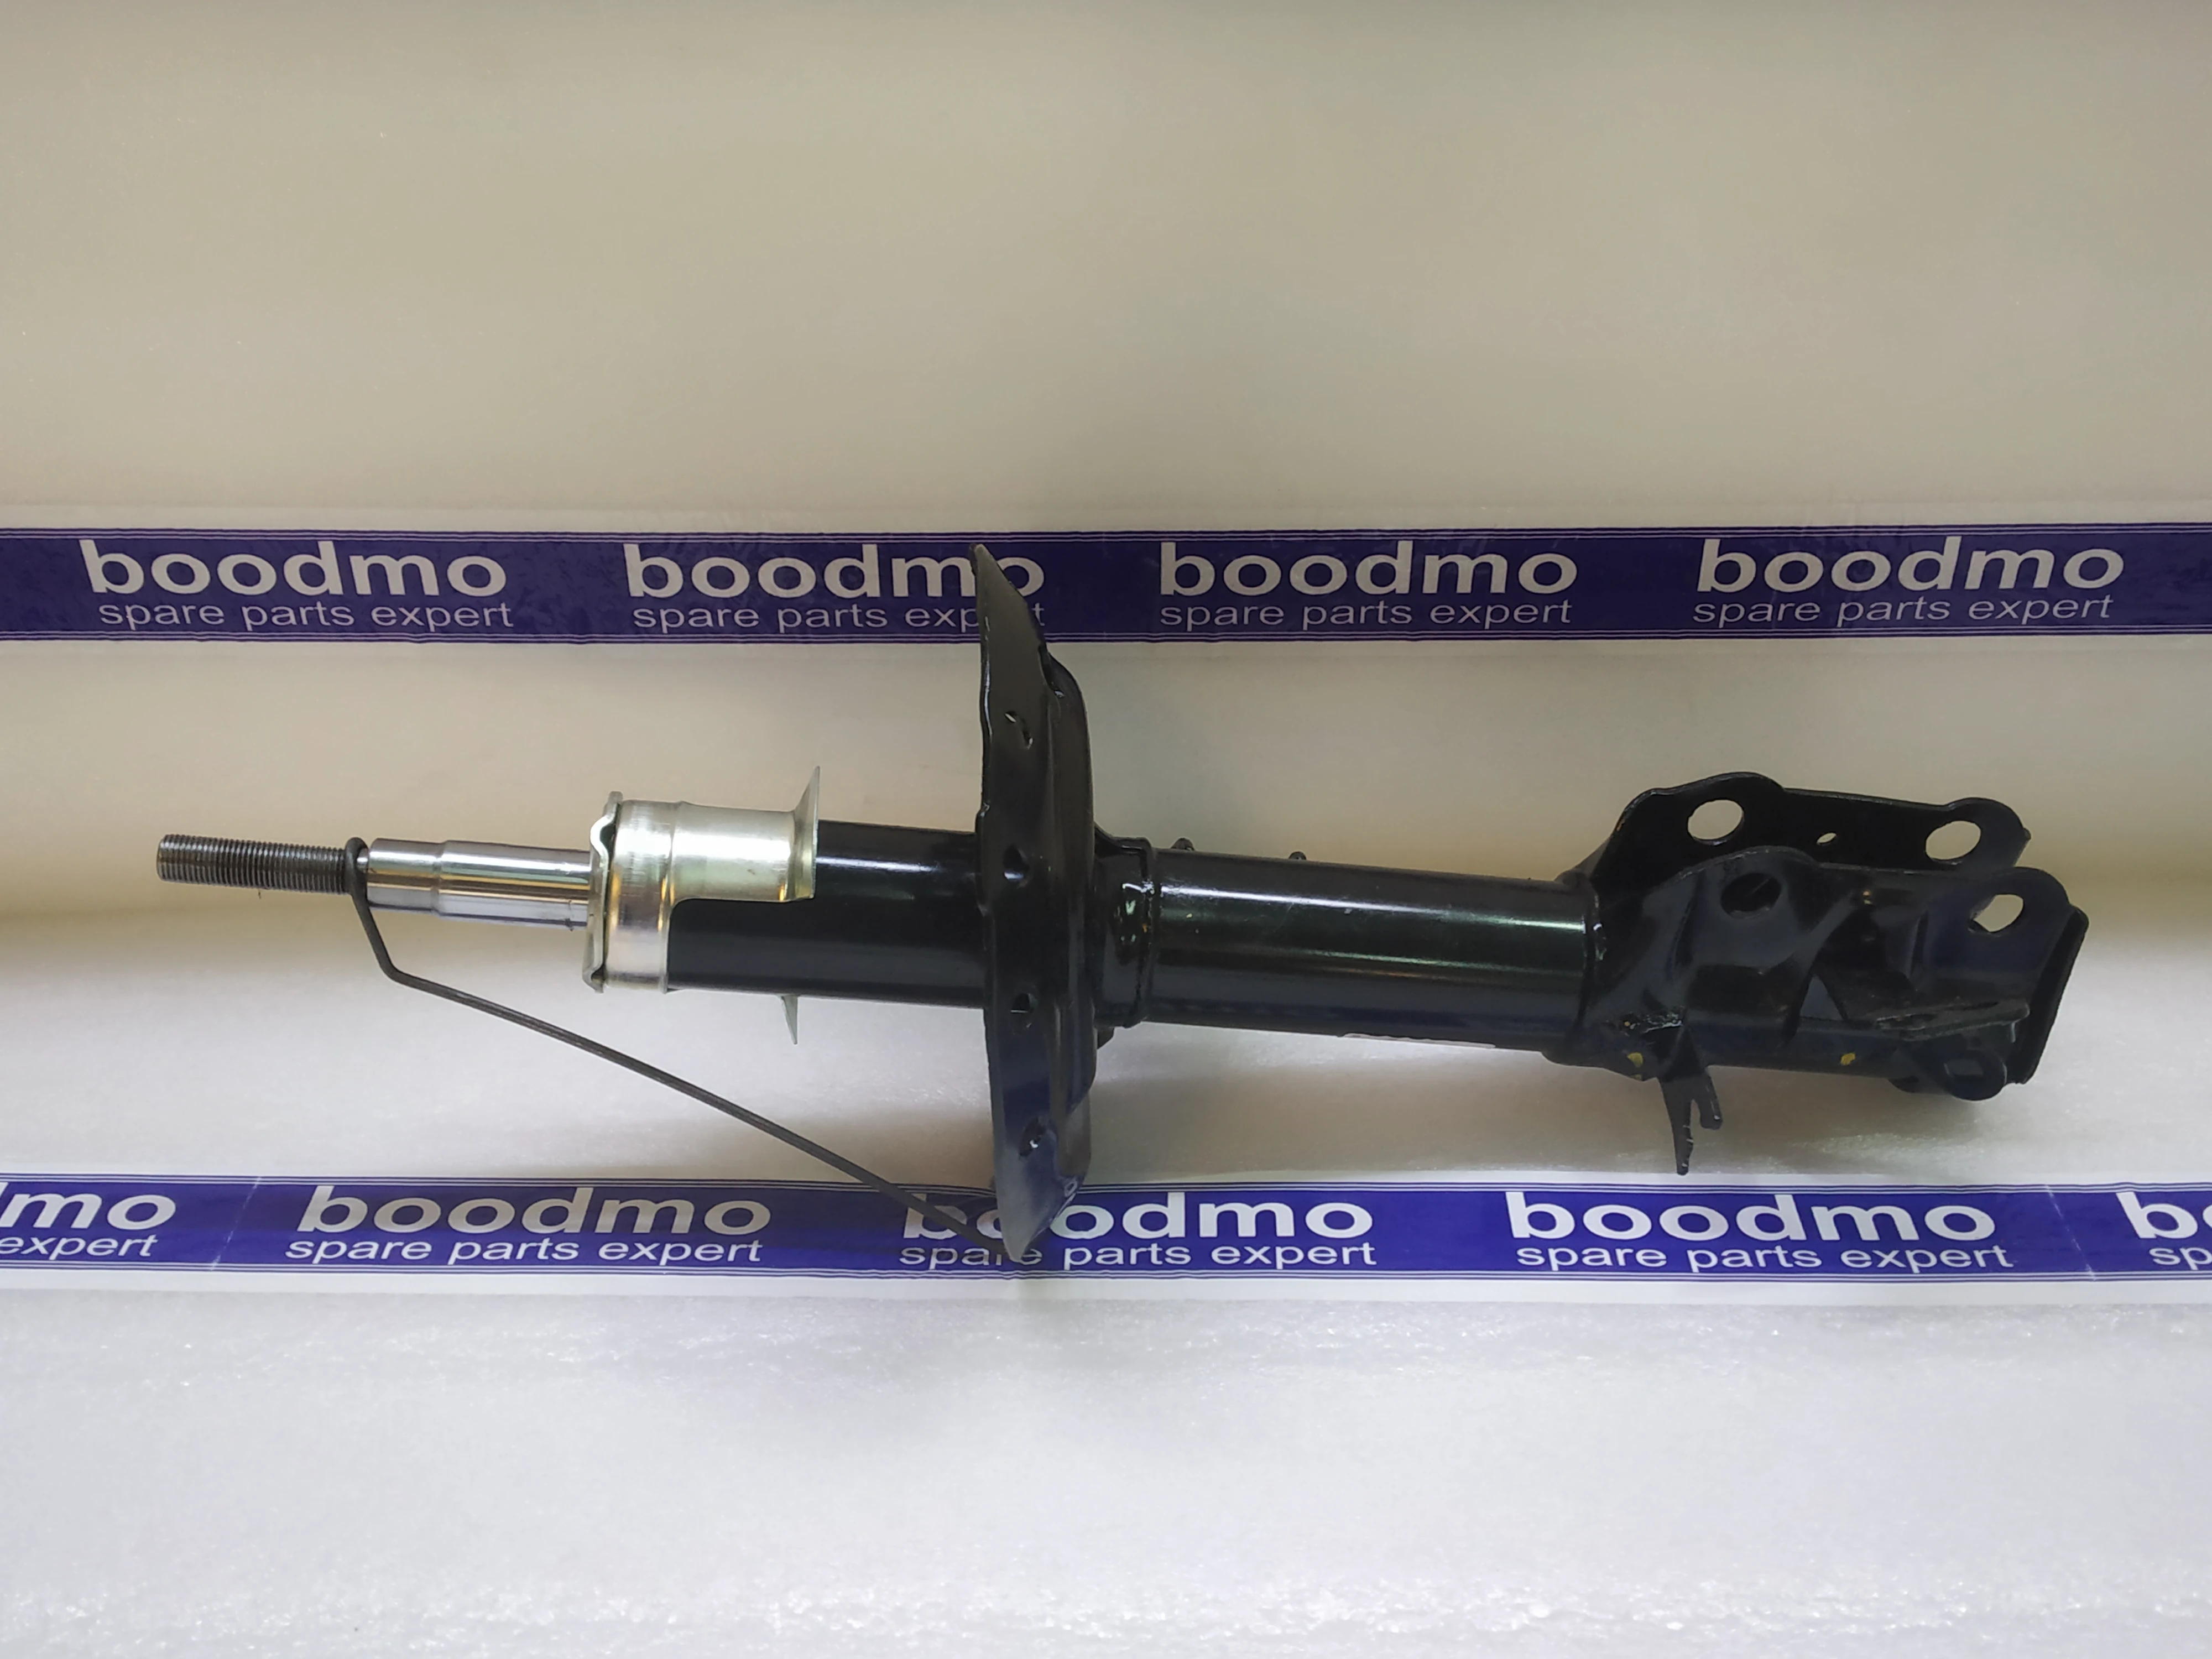 Front Suspension Strut Right: Mark Xtralife SGM0-103 -compatibility,  features, prices. boodmo